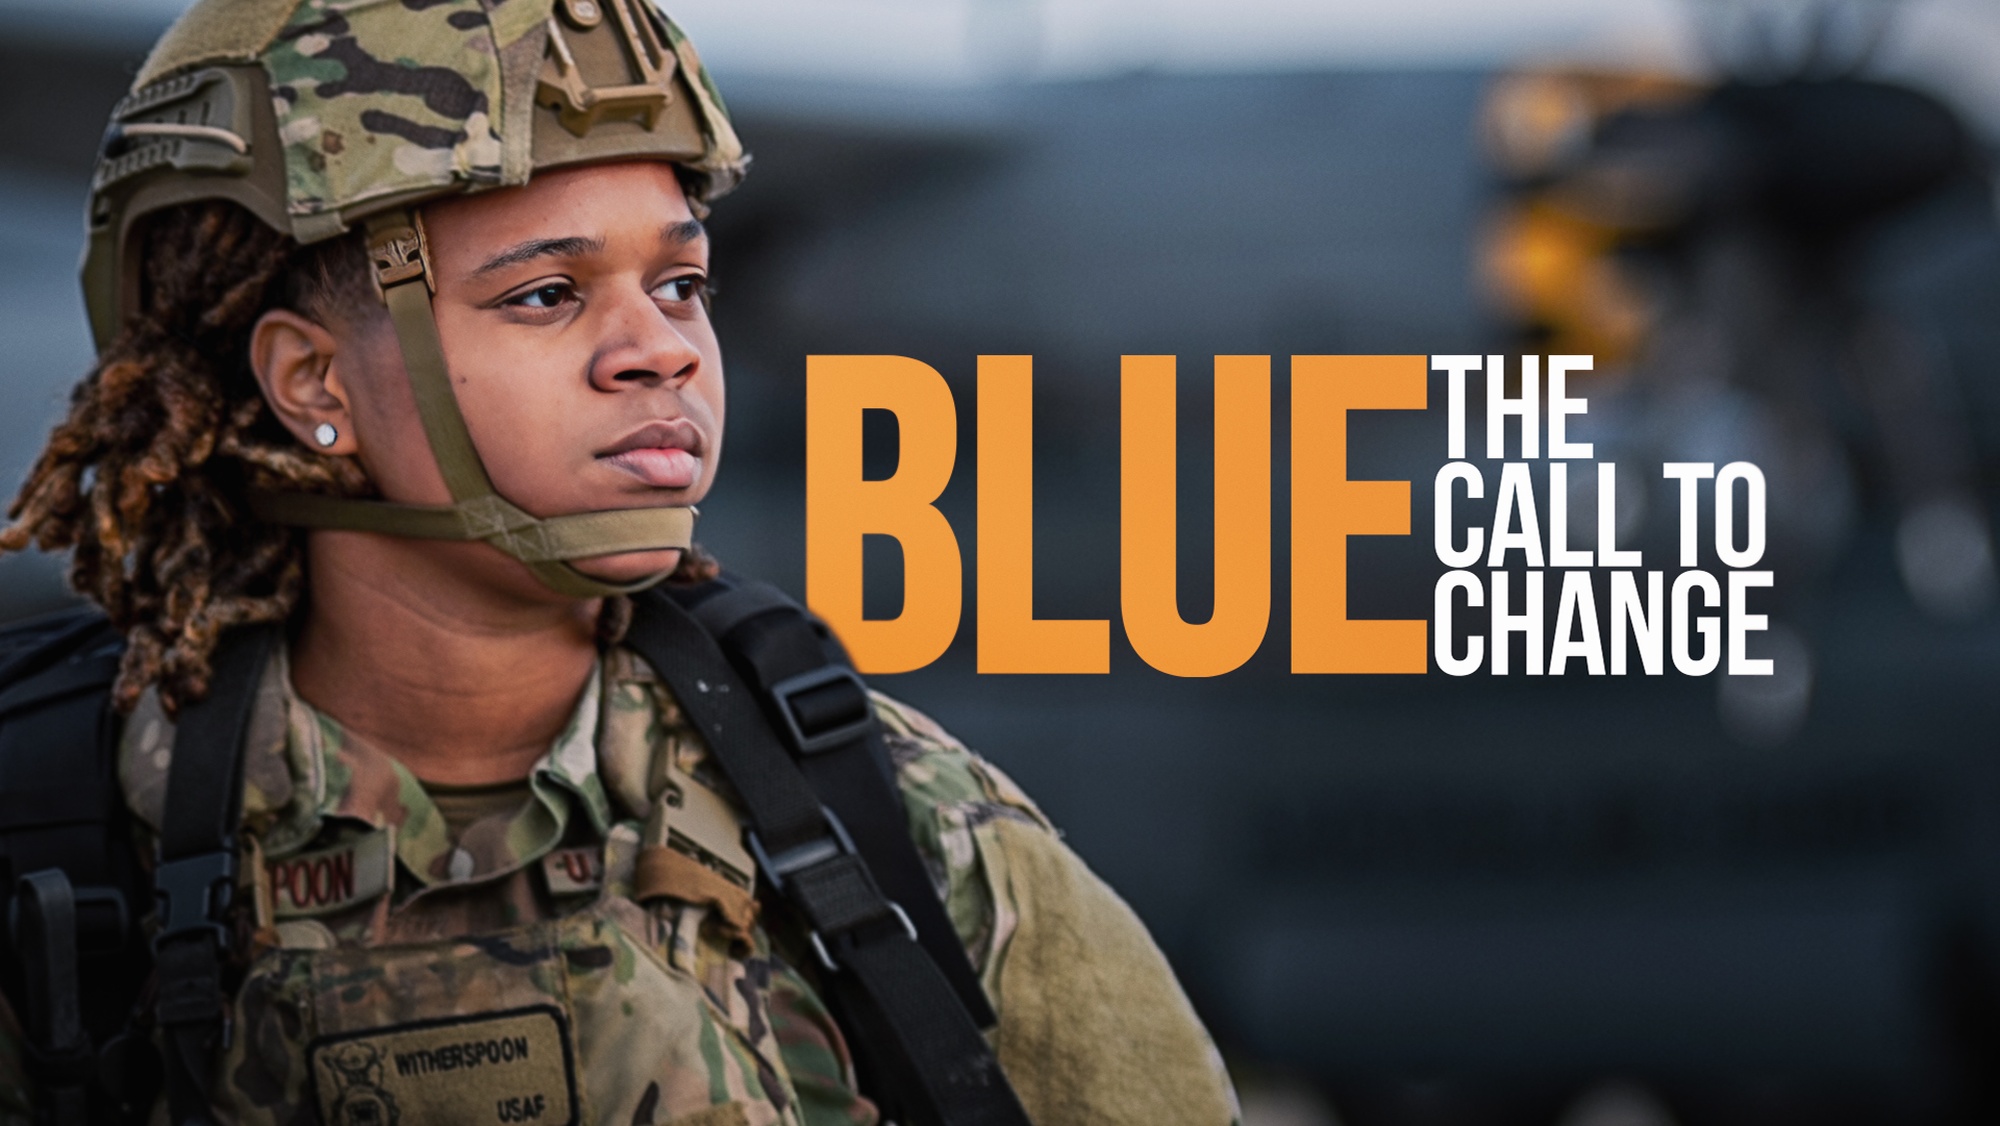 In this edition of BLUE, we take a look at how the Department of the Air Force is changing to meet the challenge of reoptimizing for great power competition.  From how the service is structured to how servicemembers will be trained and deployed, we look at what’s driving change and how it impacts people.